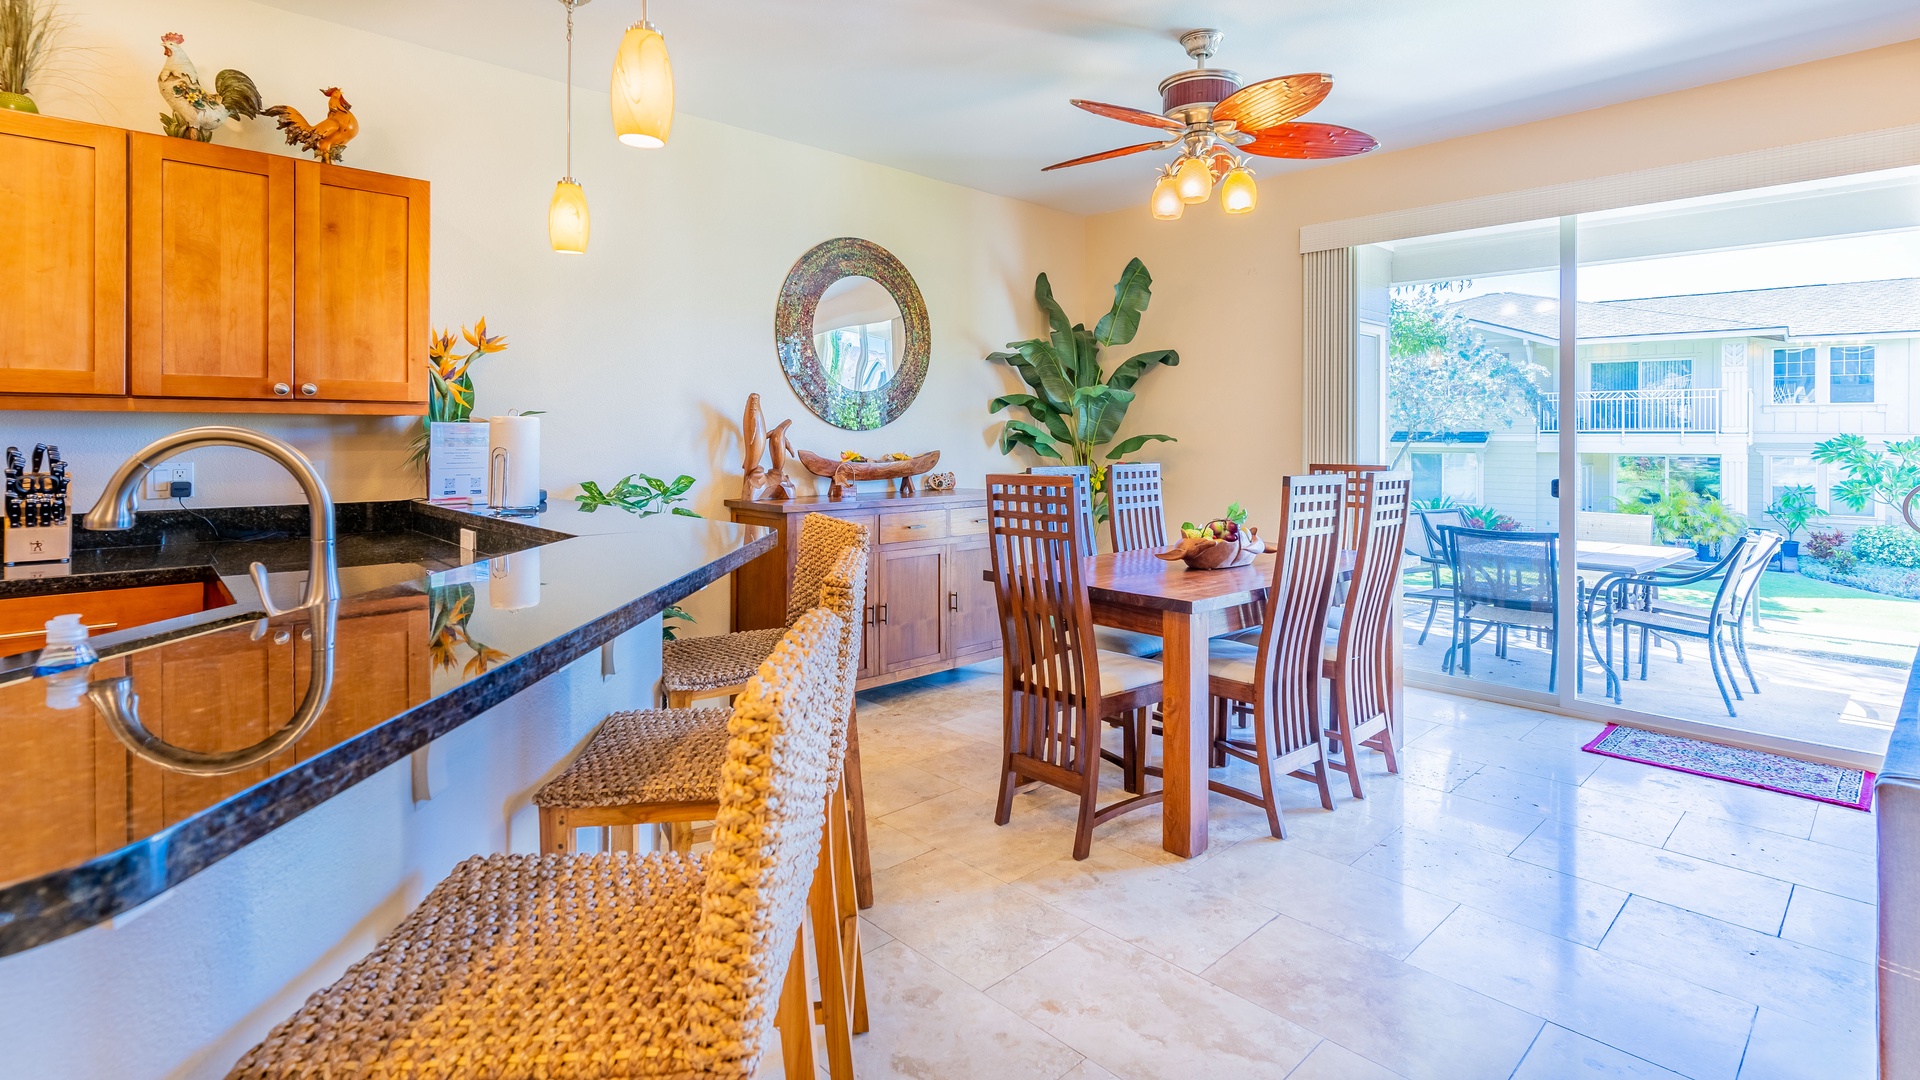 Kapolei Vacation Rentals, Ko Olina Kai 1033C - Enjoy indoor / outdoor dining with the formal dining area and the lanai.